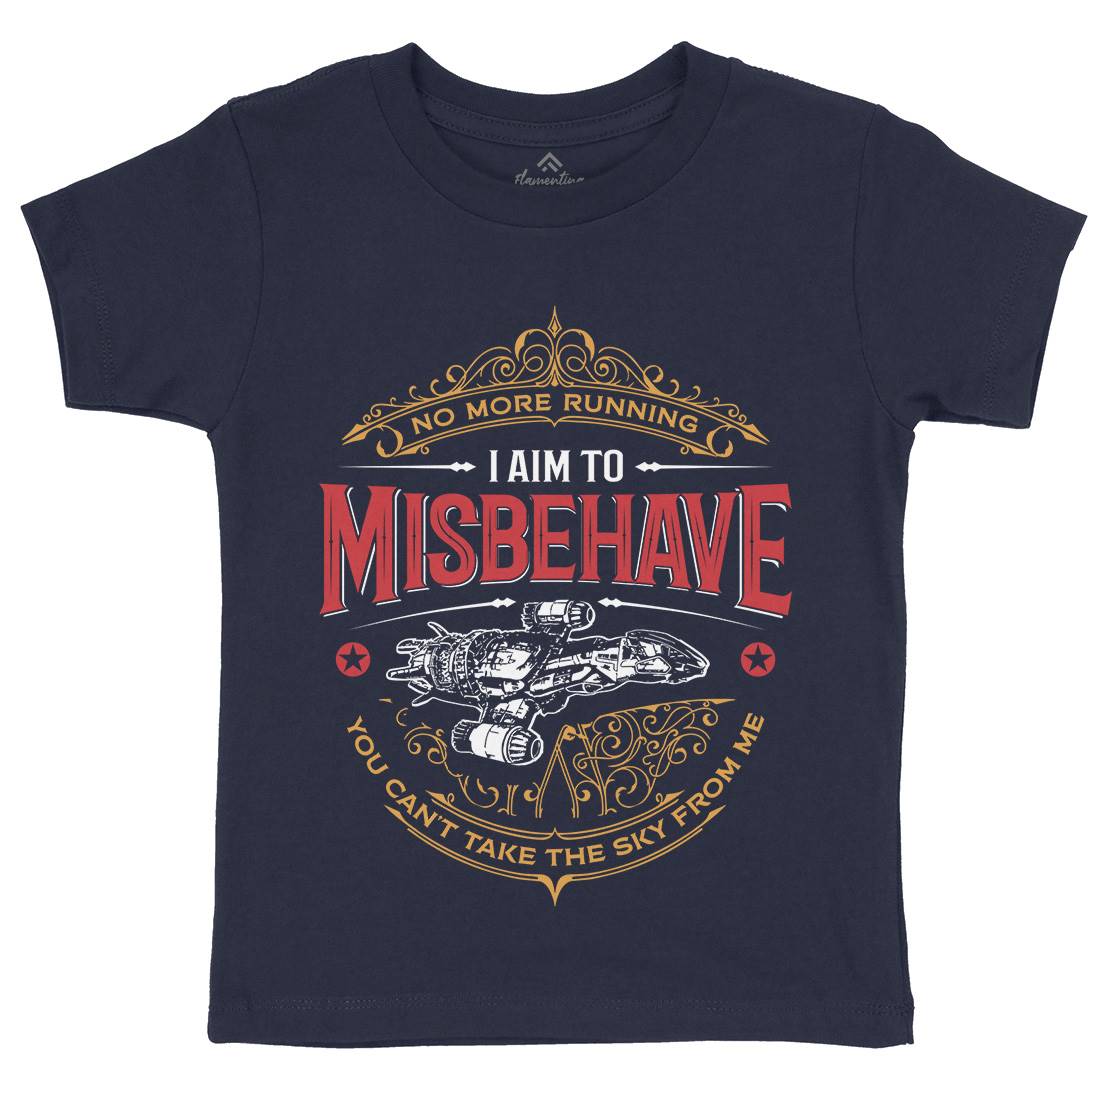 I Aim To Misbehave Kids Crew Neck T-Shirt Space D435